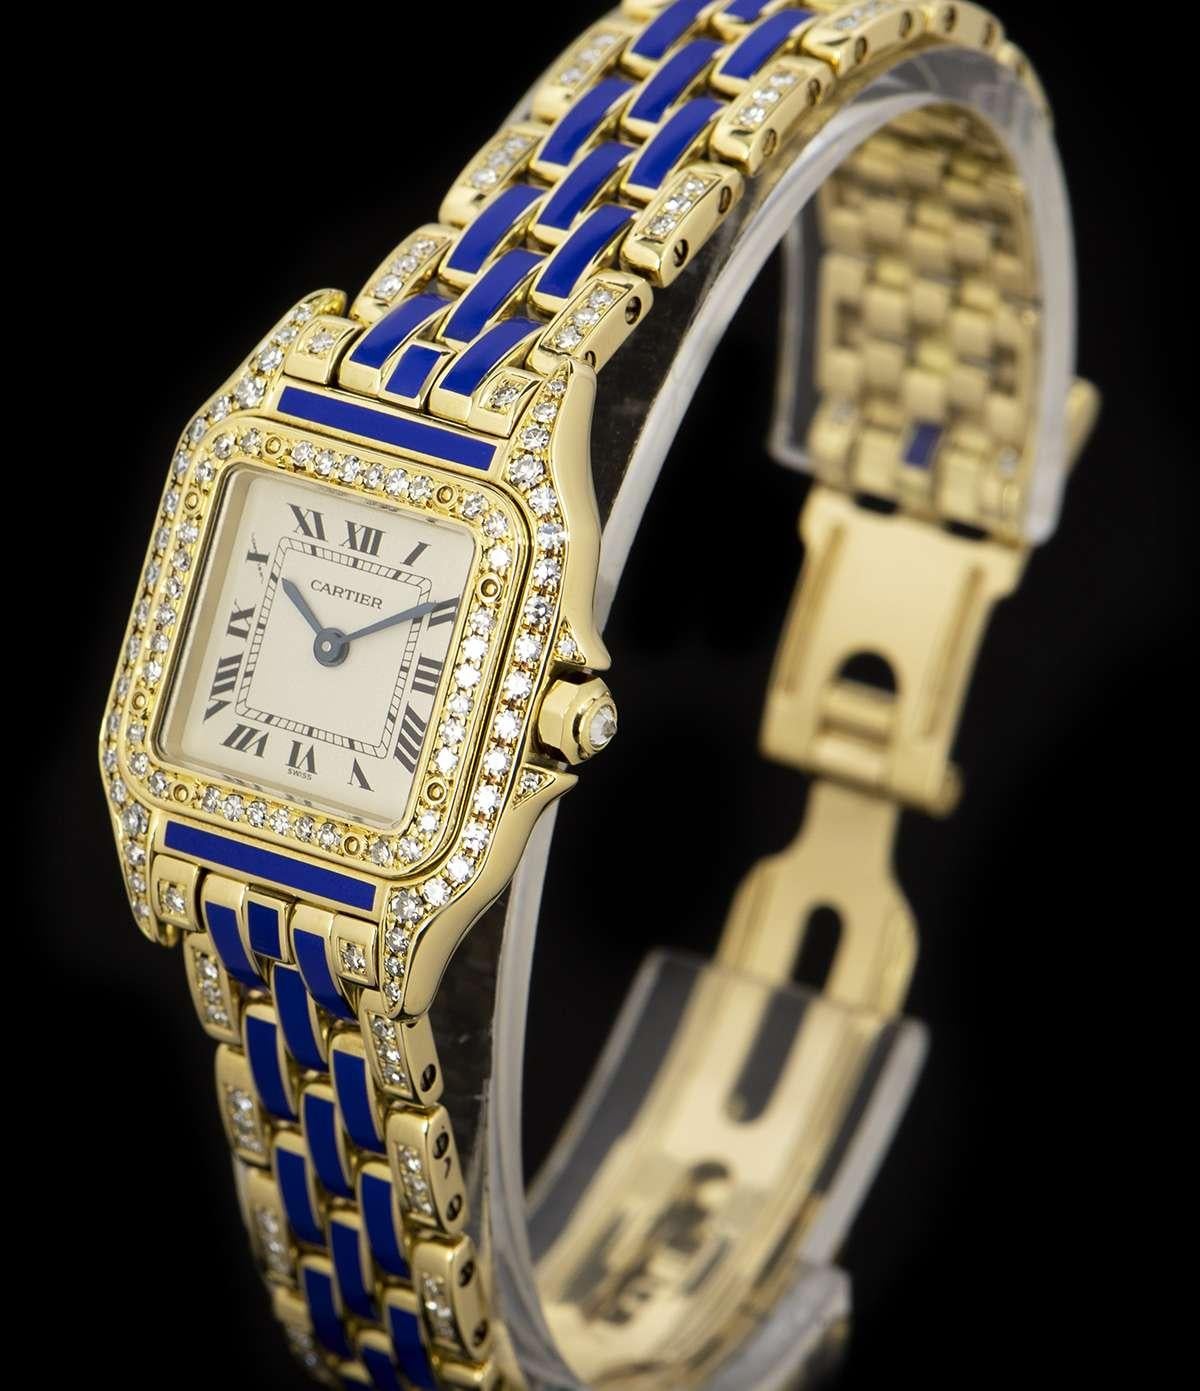 A Very Rare 18k Yellow Gold Panthere Ladies Wristwatch, silver dial with roman numerals and a secret signature at 